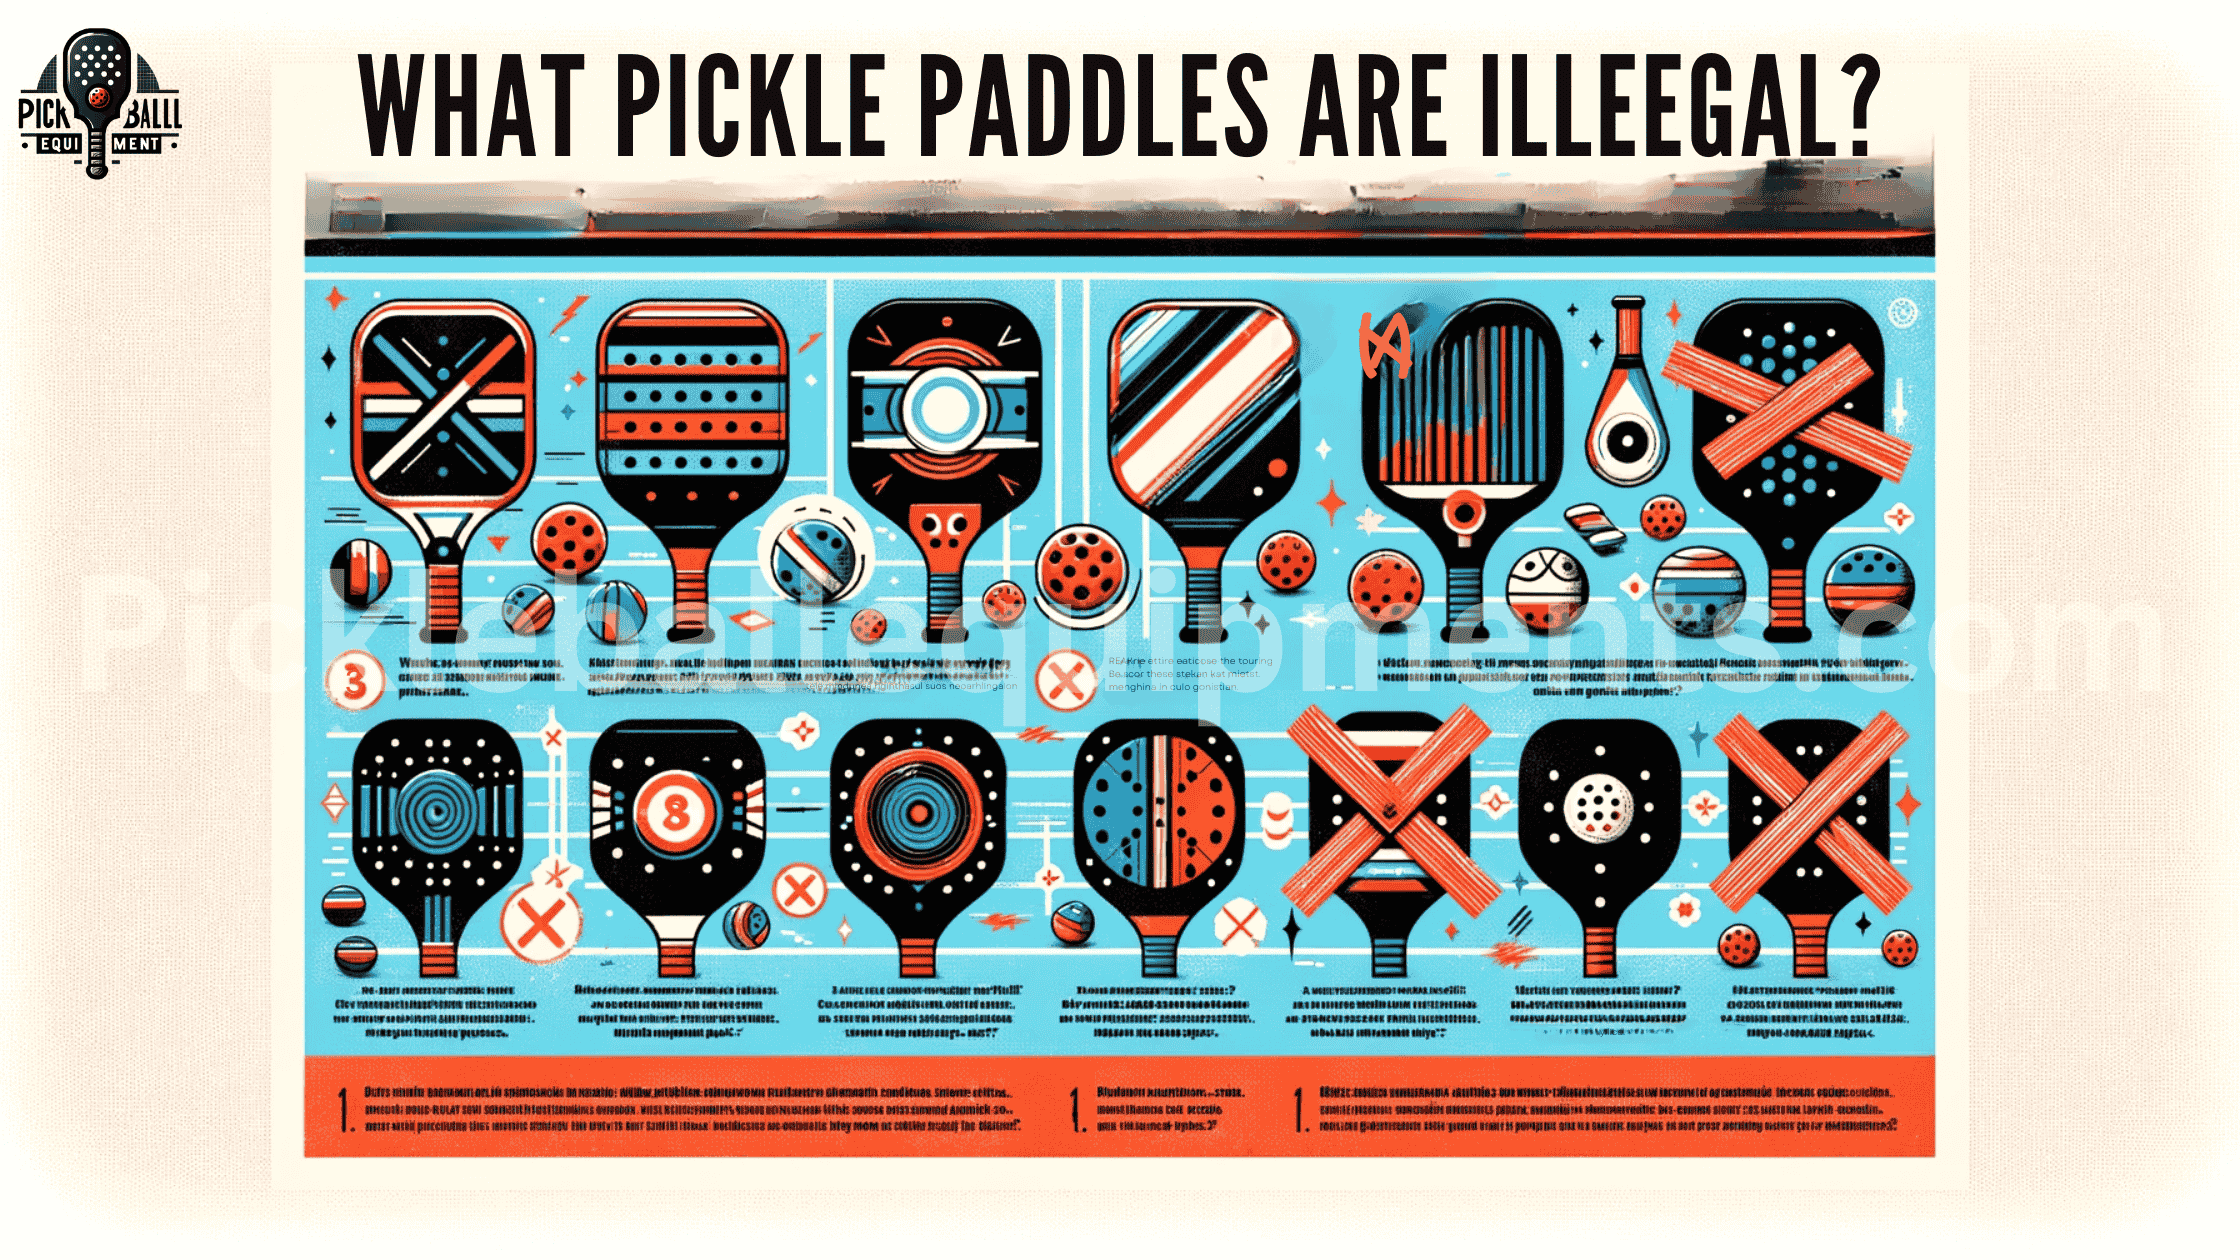 What Pickleball Paddles are Illegal